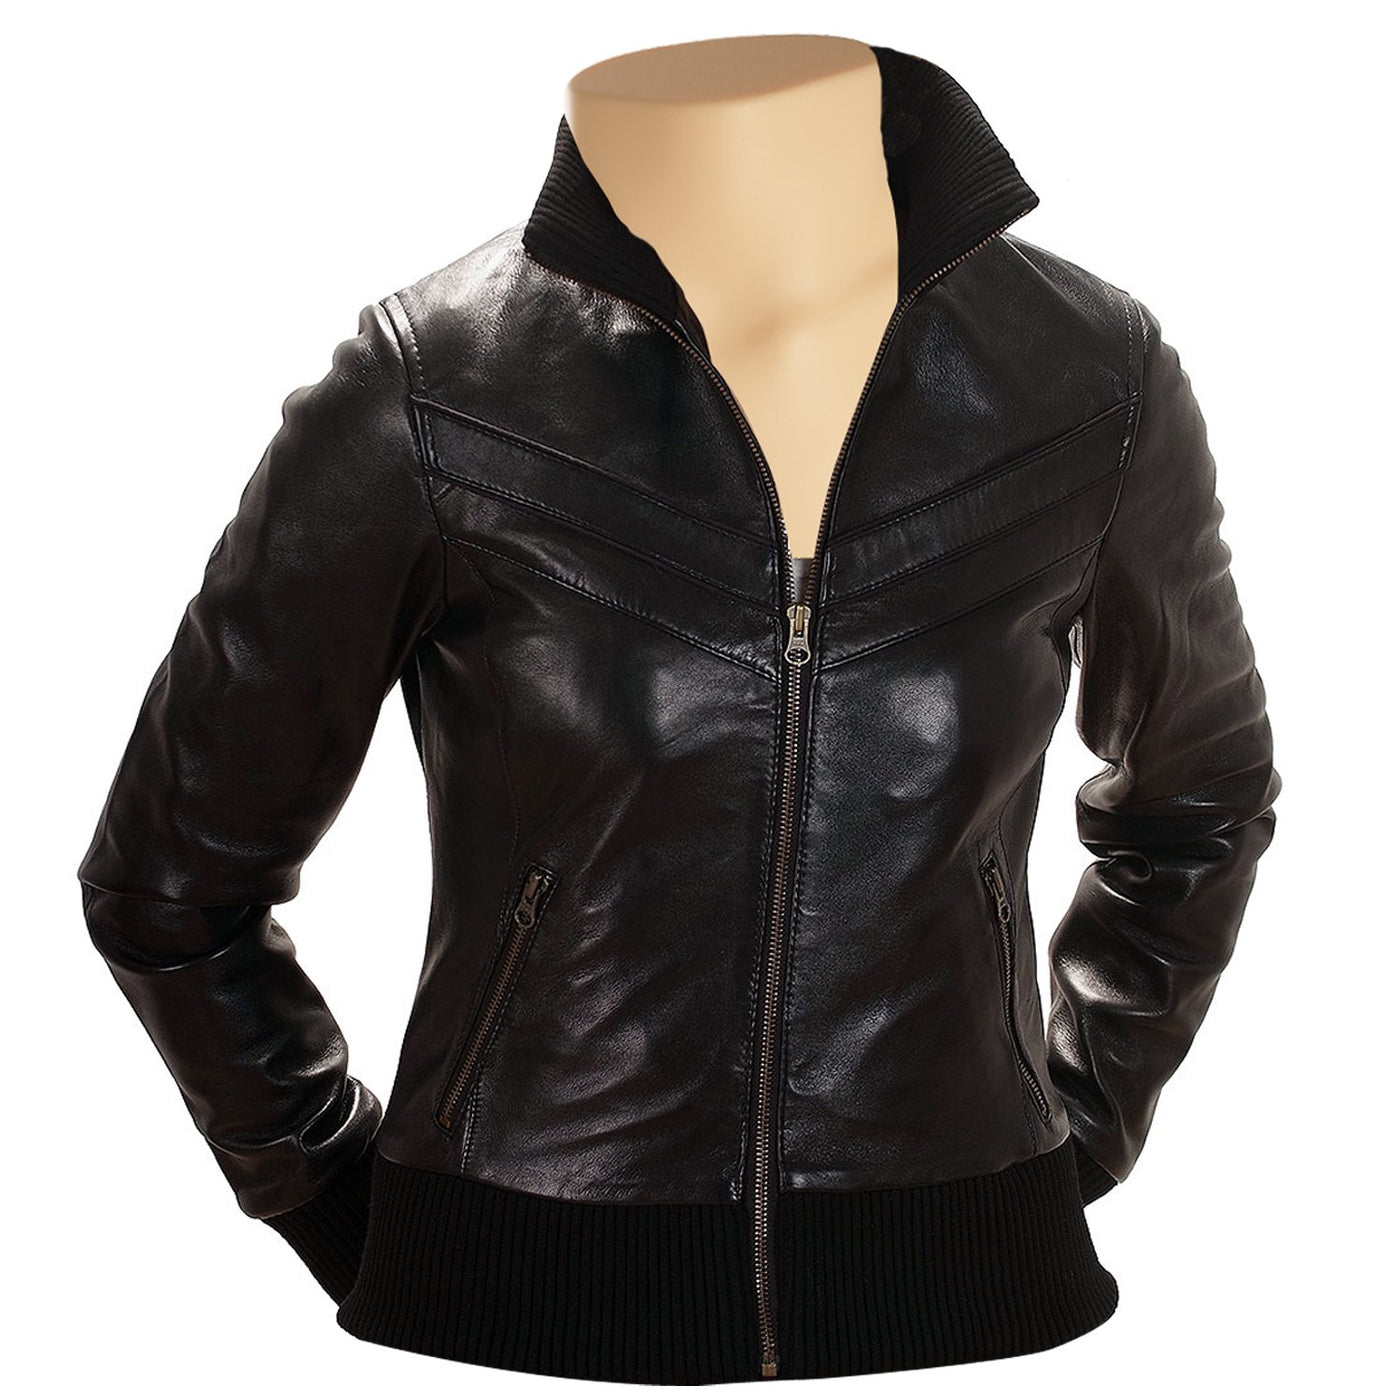 Women’s Adele Black Leather Jacket with Ribbed Collar and Hem